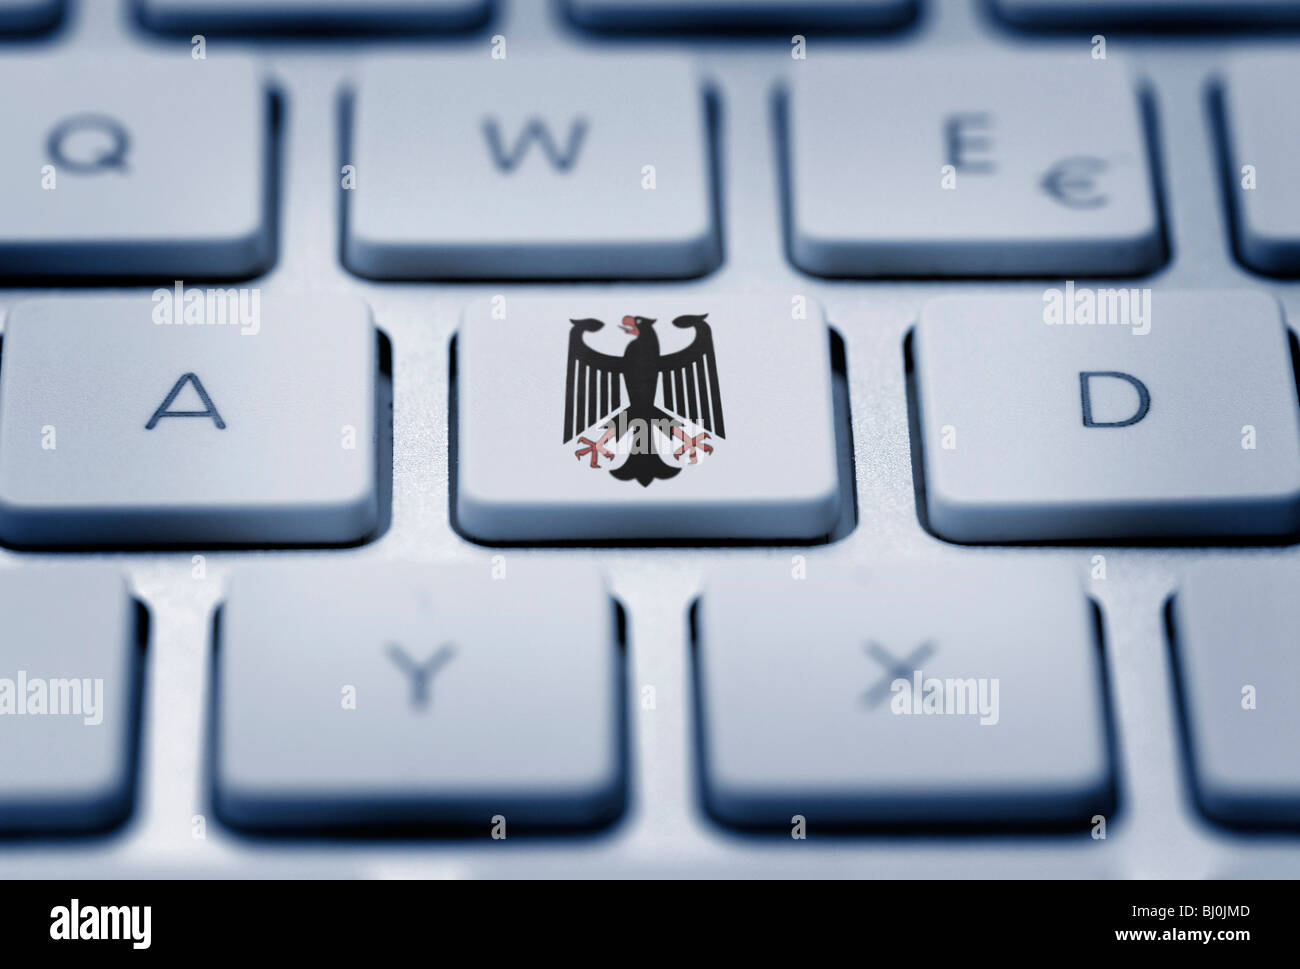 Federal Eagle on computer keyboard, symbol photo online searches Stock Photo